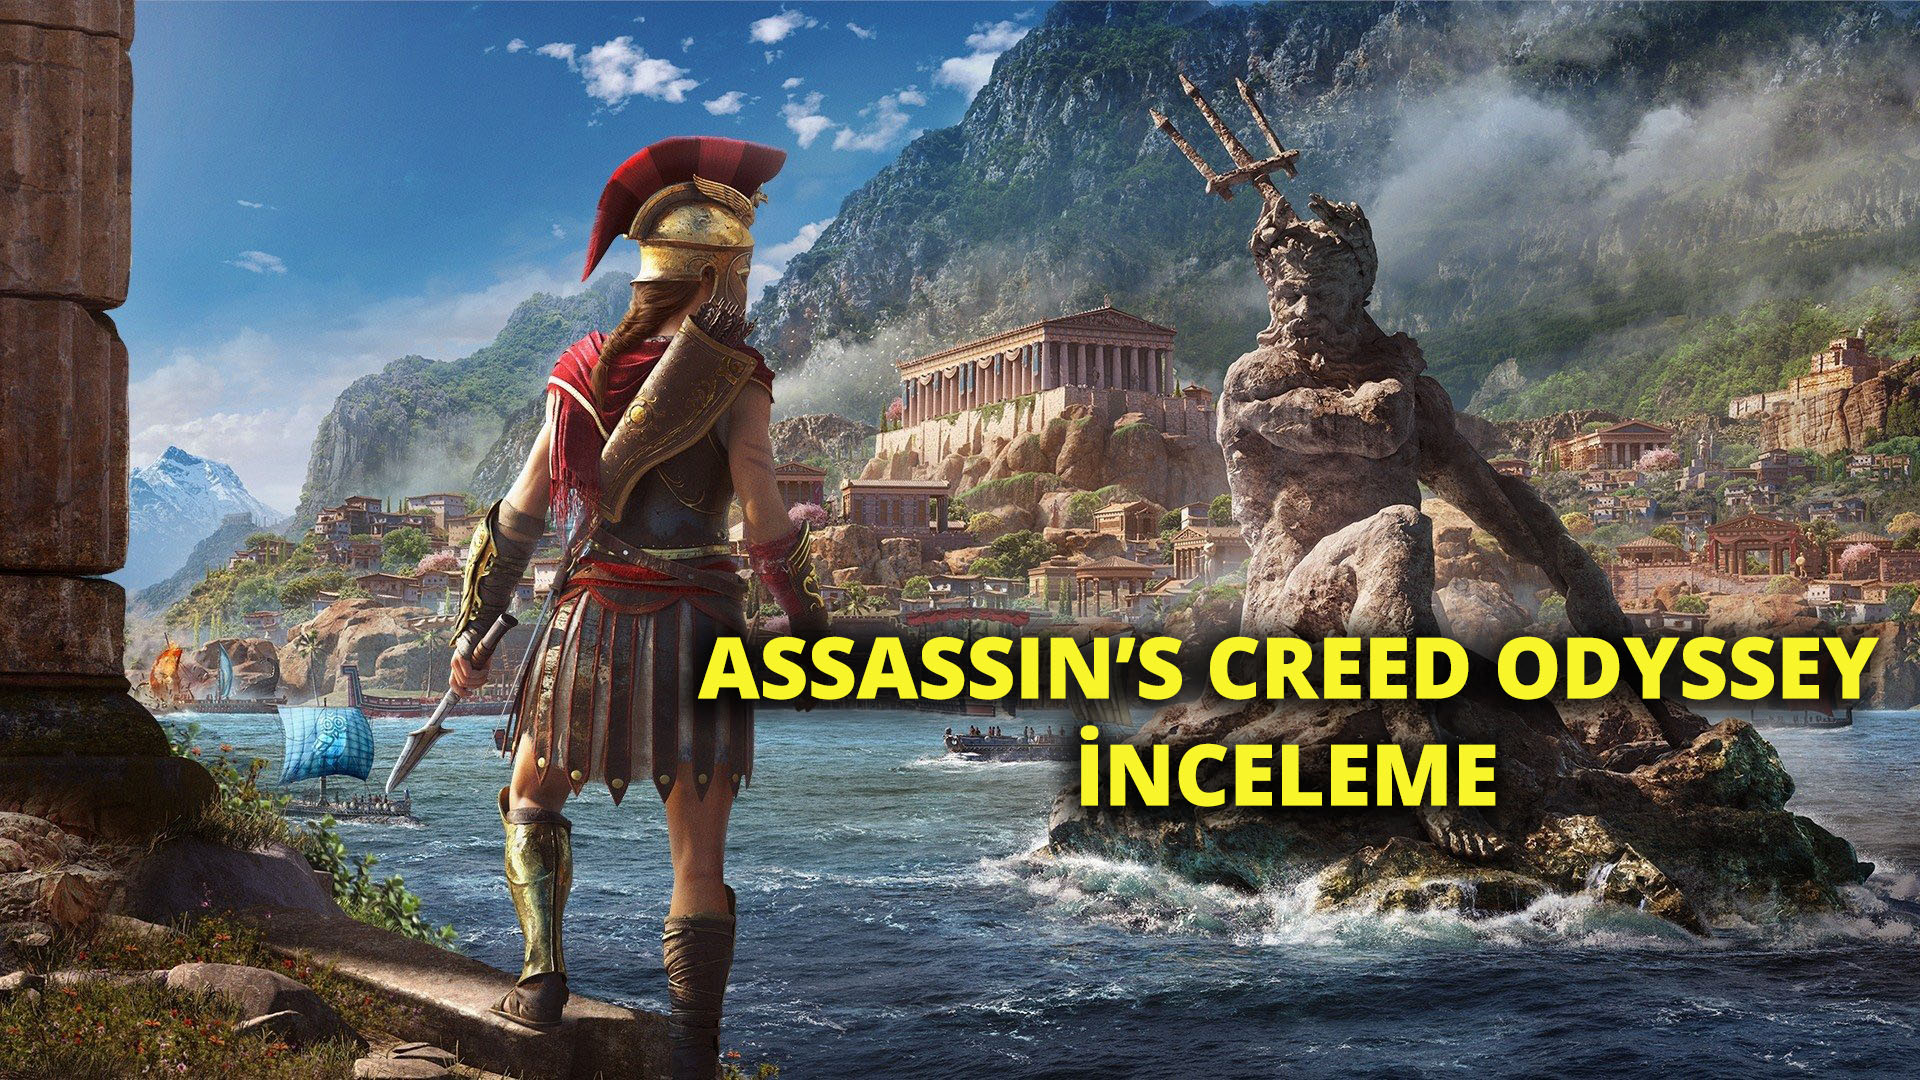 Assassin’s Creed Odyssey inceleme